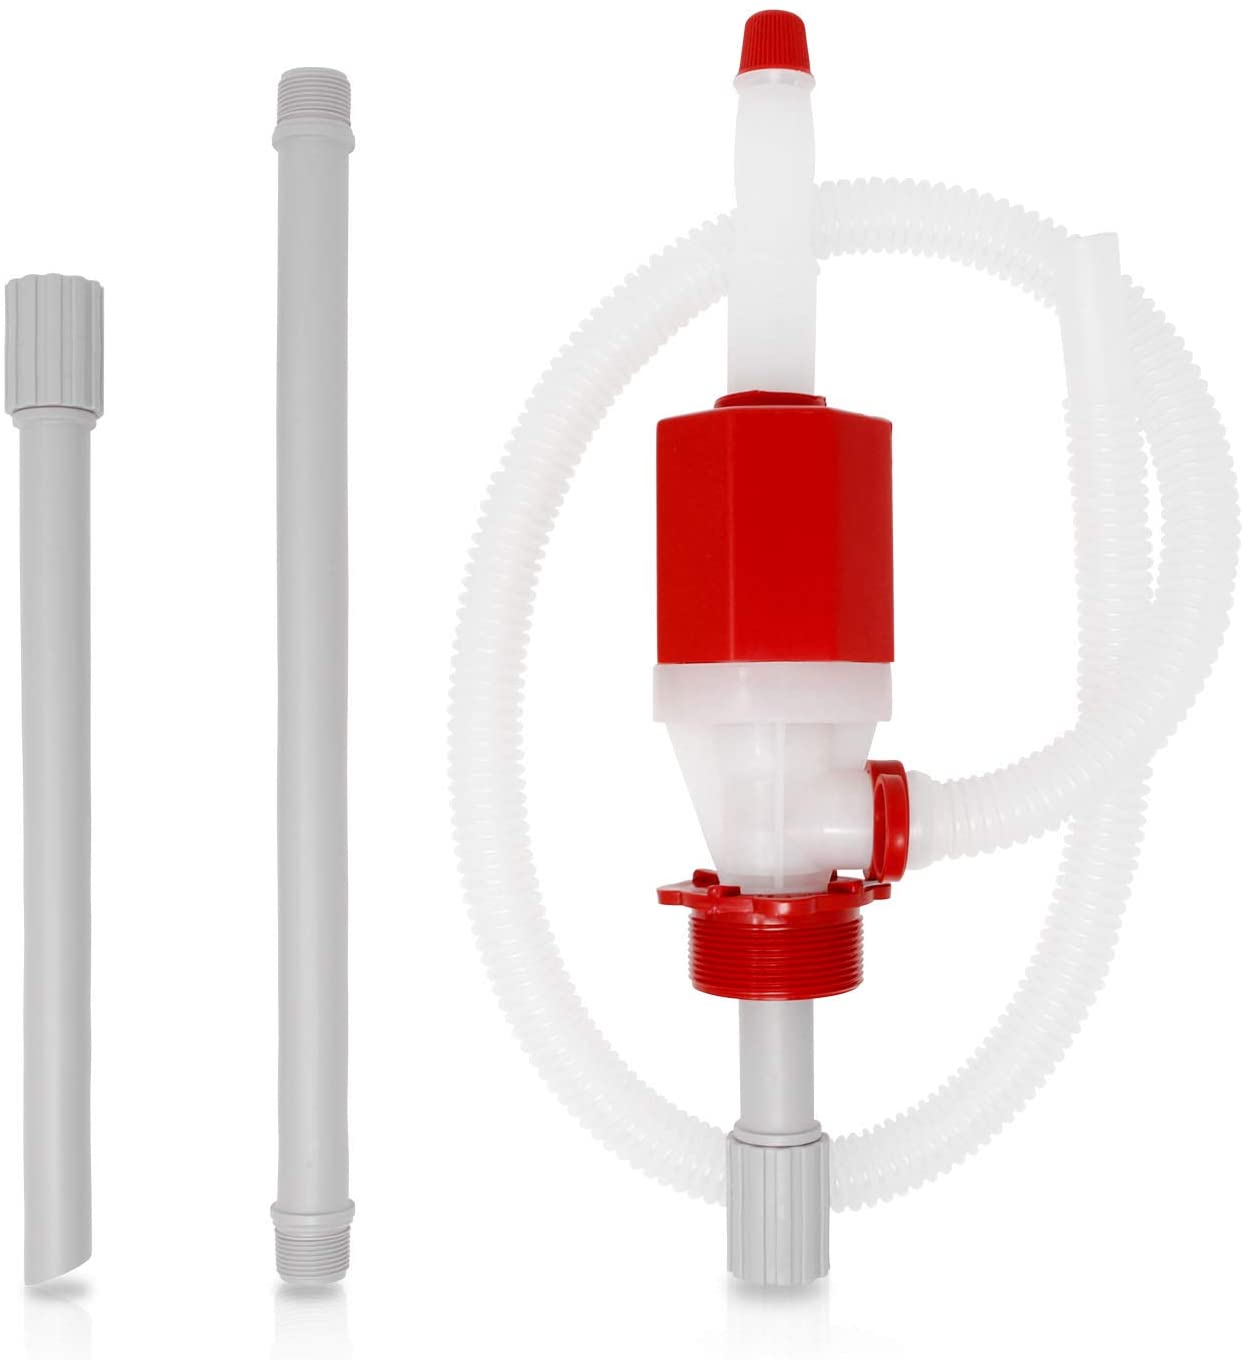 A red and white Tera Pump 55 Gallon BPA-Free Compact Manual Drum Pump with Adjustable Length - (SHIPS IN 1-2 WEEKS) and a red and white hose.